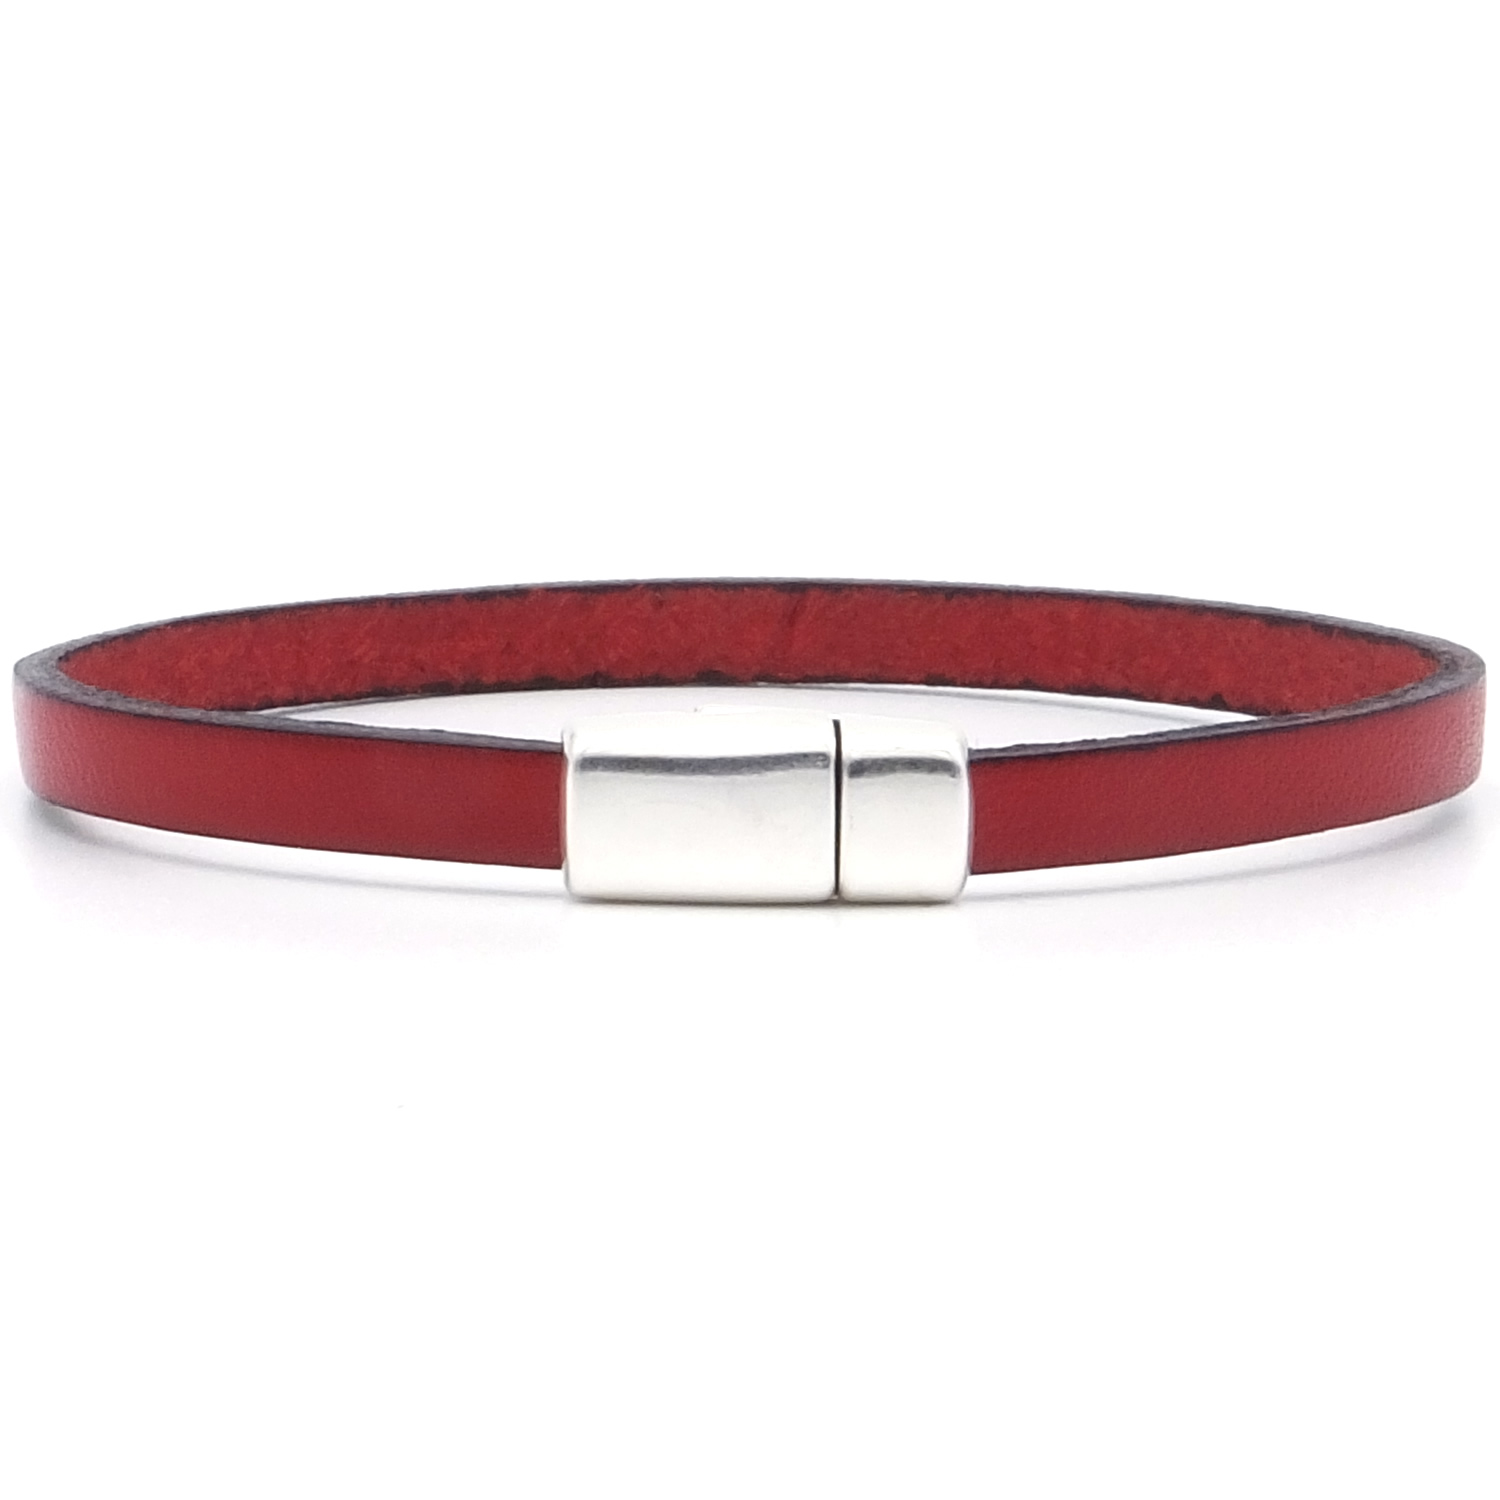 Hypoallergenic No Lead and No Poisonous Cadmium I Love My Marine Vintage Antique Silver Clasp/ Genuine Red Leather Bracelet Safe-No Nickel 